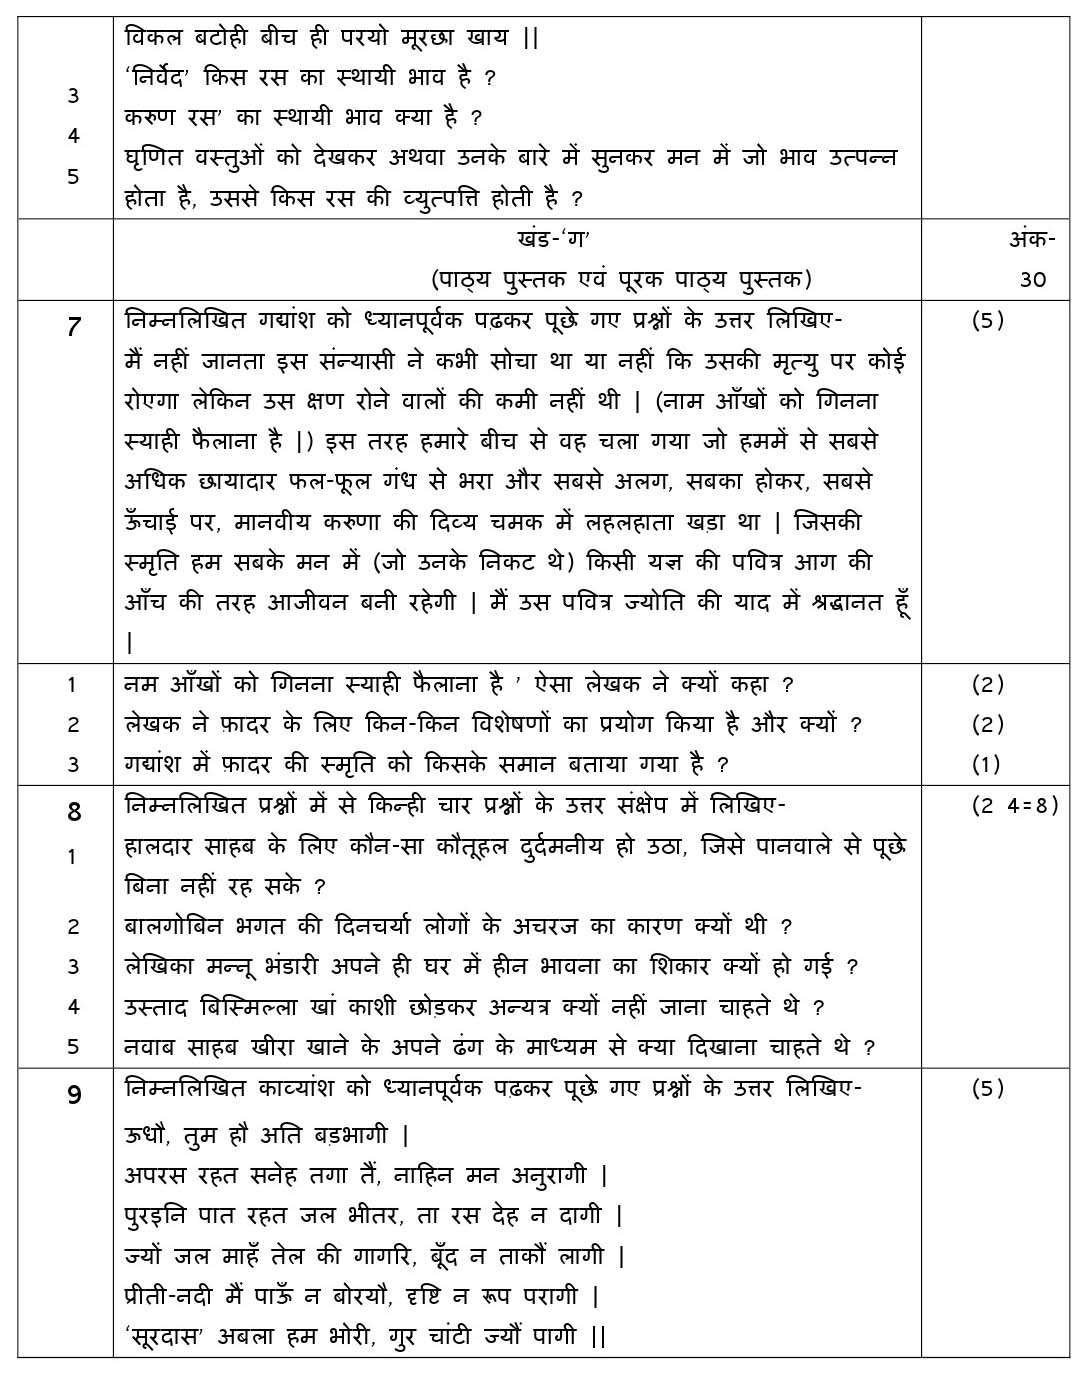 Hindi A CBSE Class X Sample Question Paper 2018-19 - Image 5